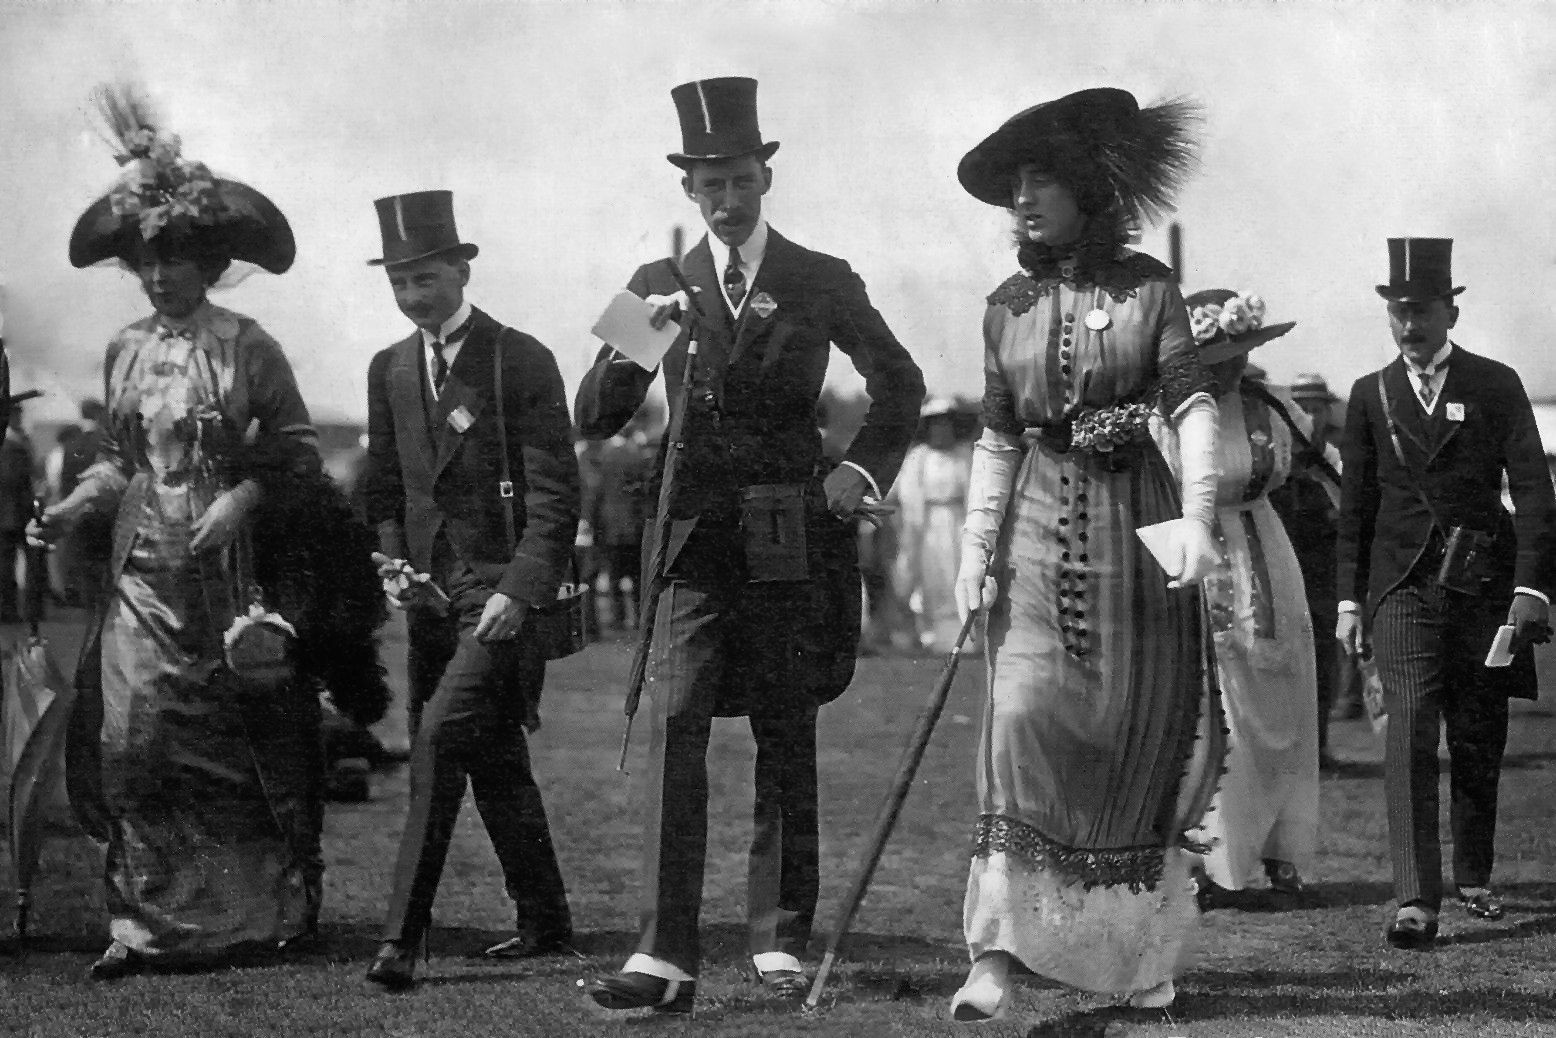 English socialite Vita Sackville-West and friends at Ascot, 1912